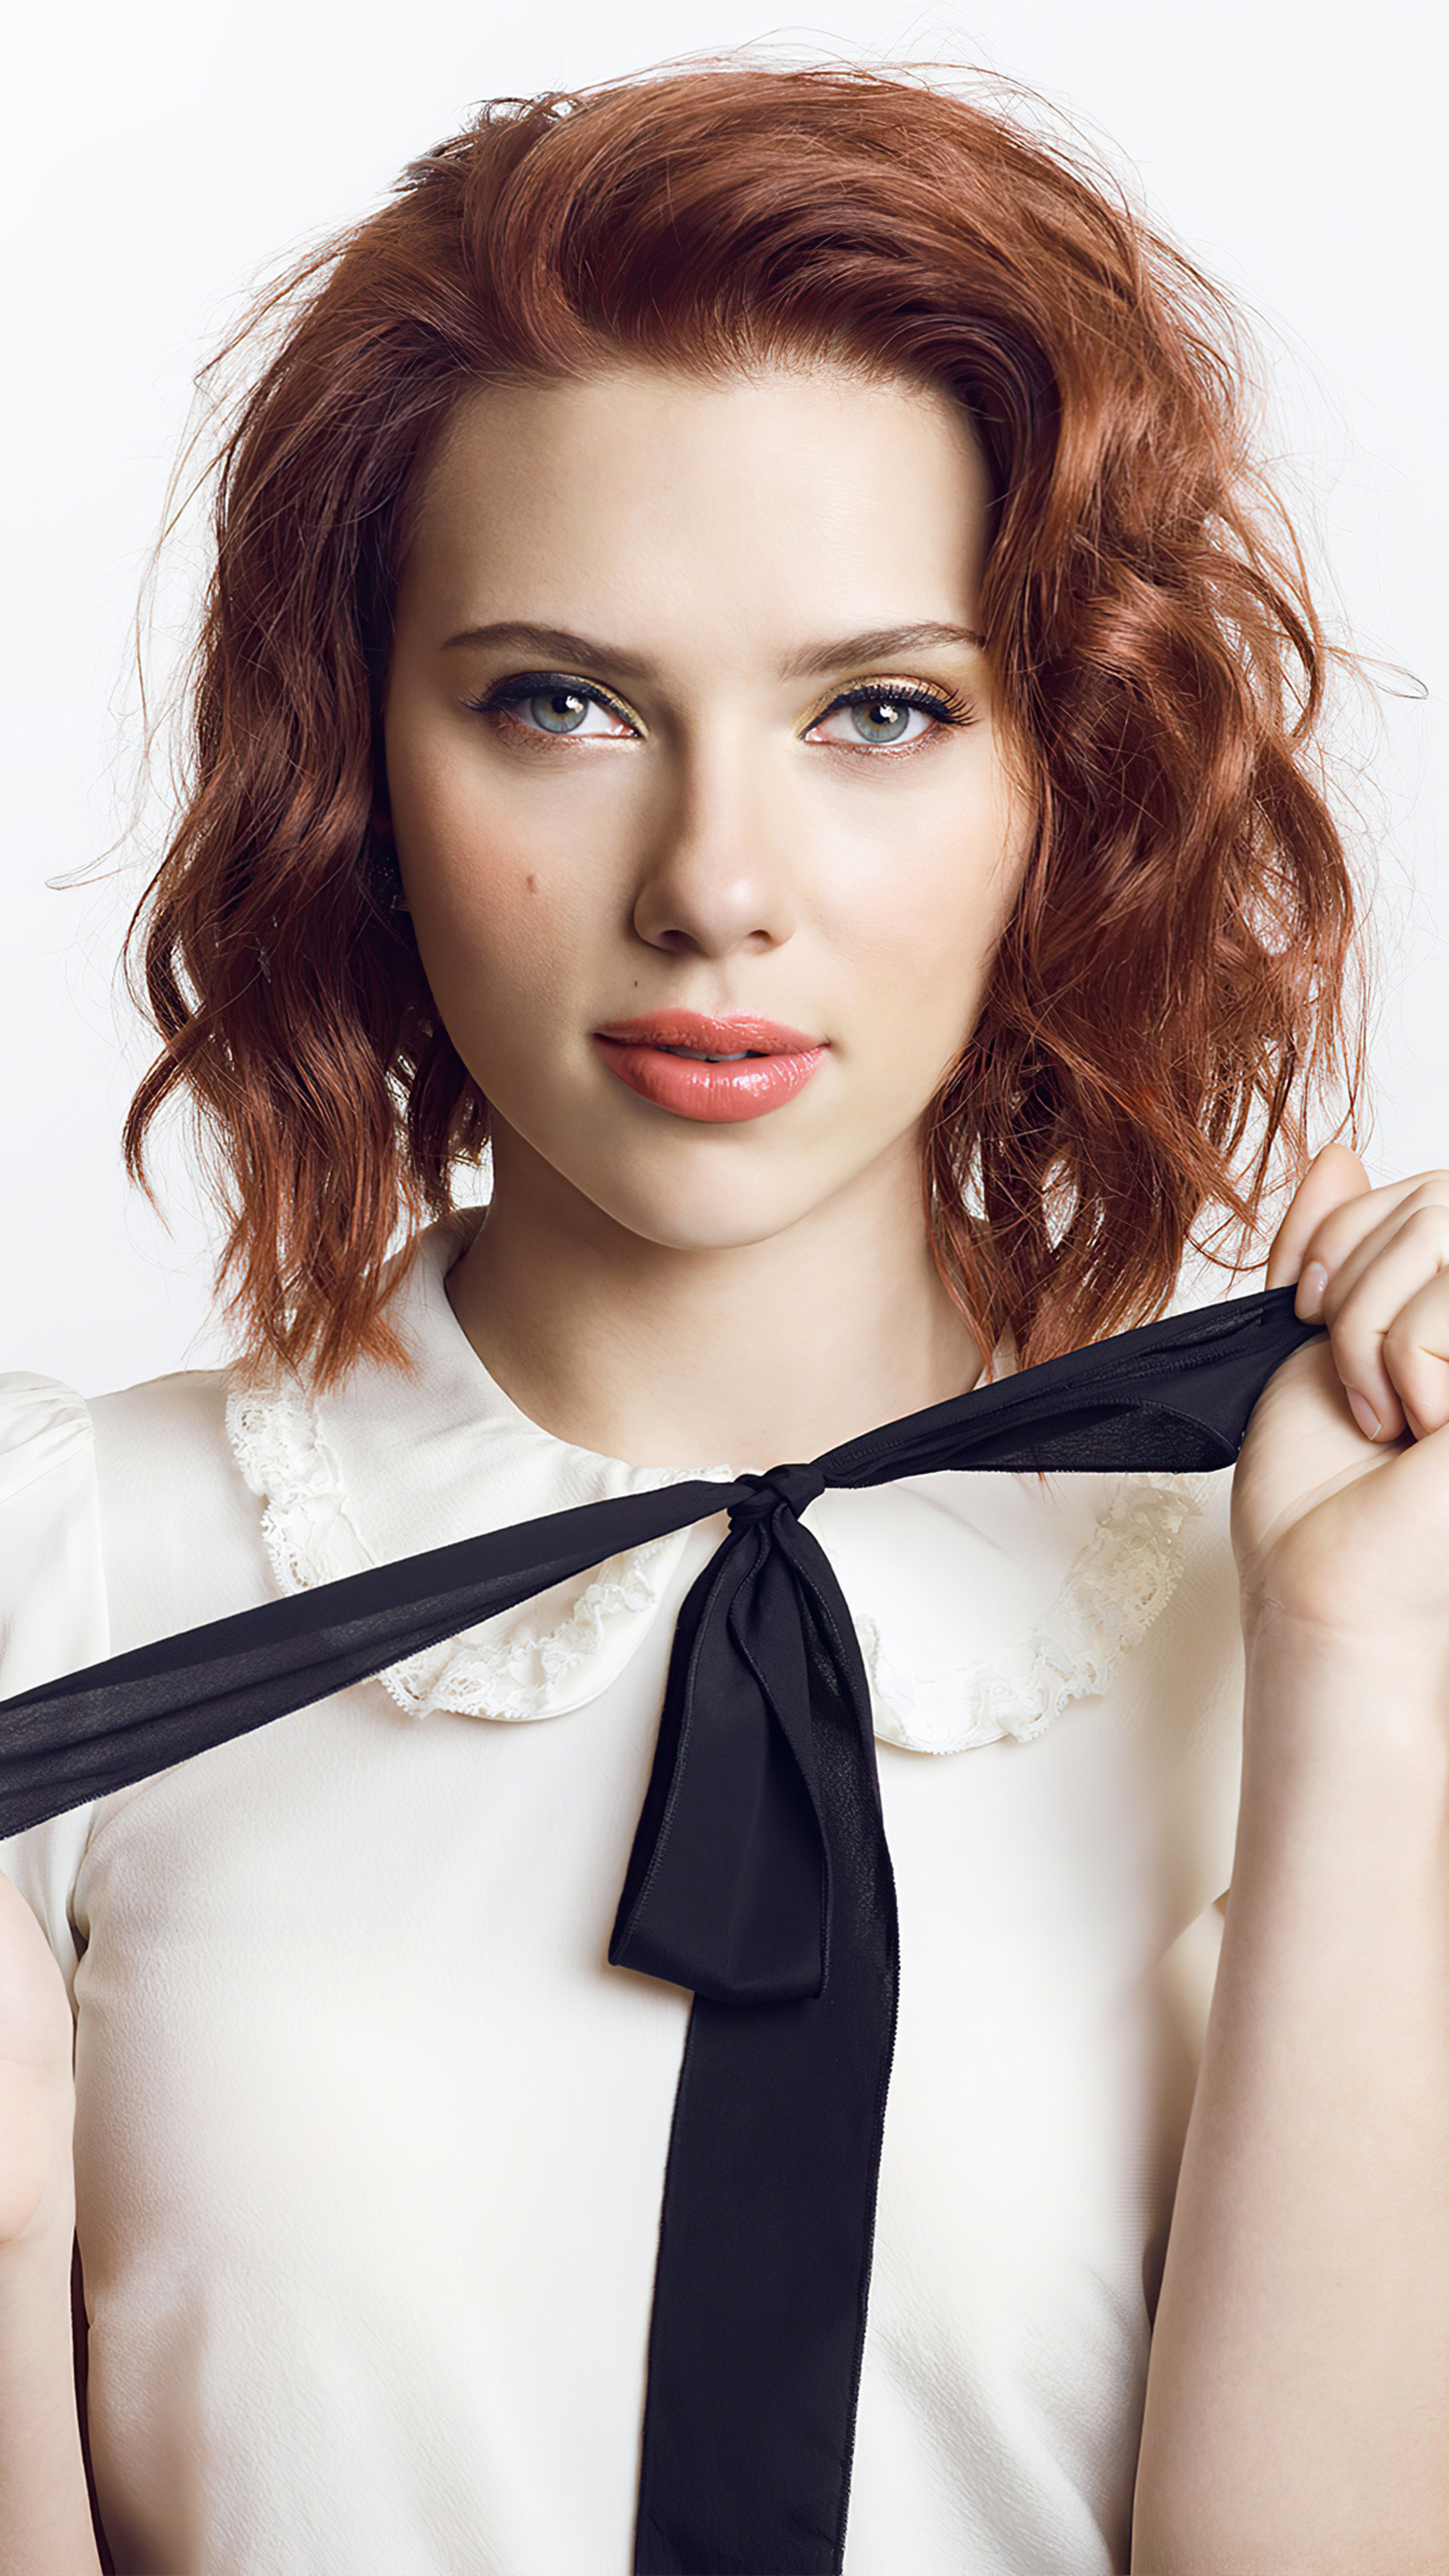 Scarlett Johansson: Was cast as Pursy in a 2004 psychological drama film, A Love Song for Bobby Long. 2160x3840 4K Background.